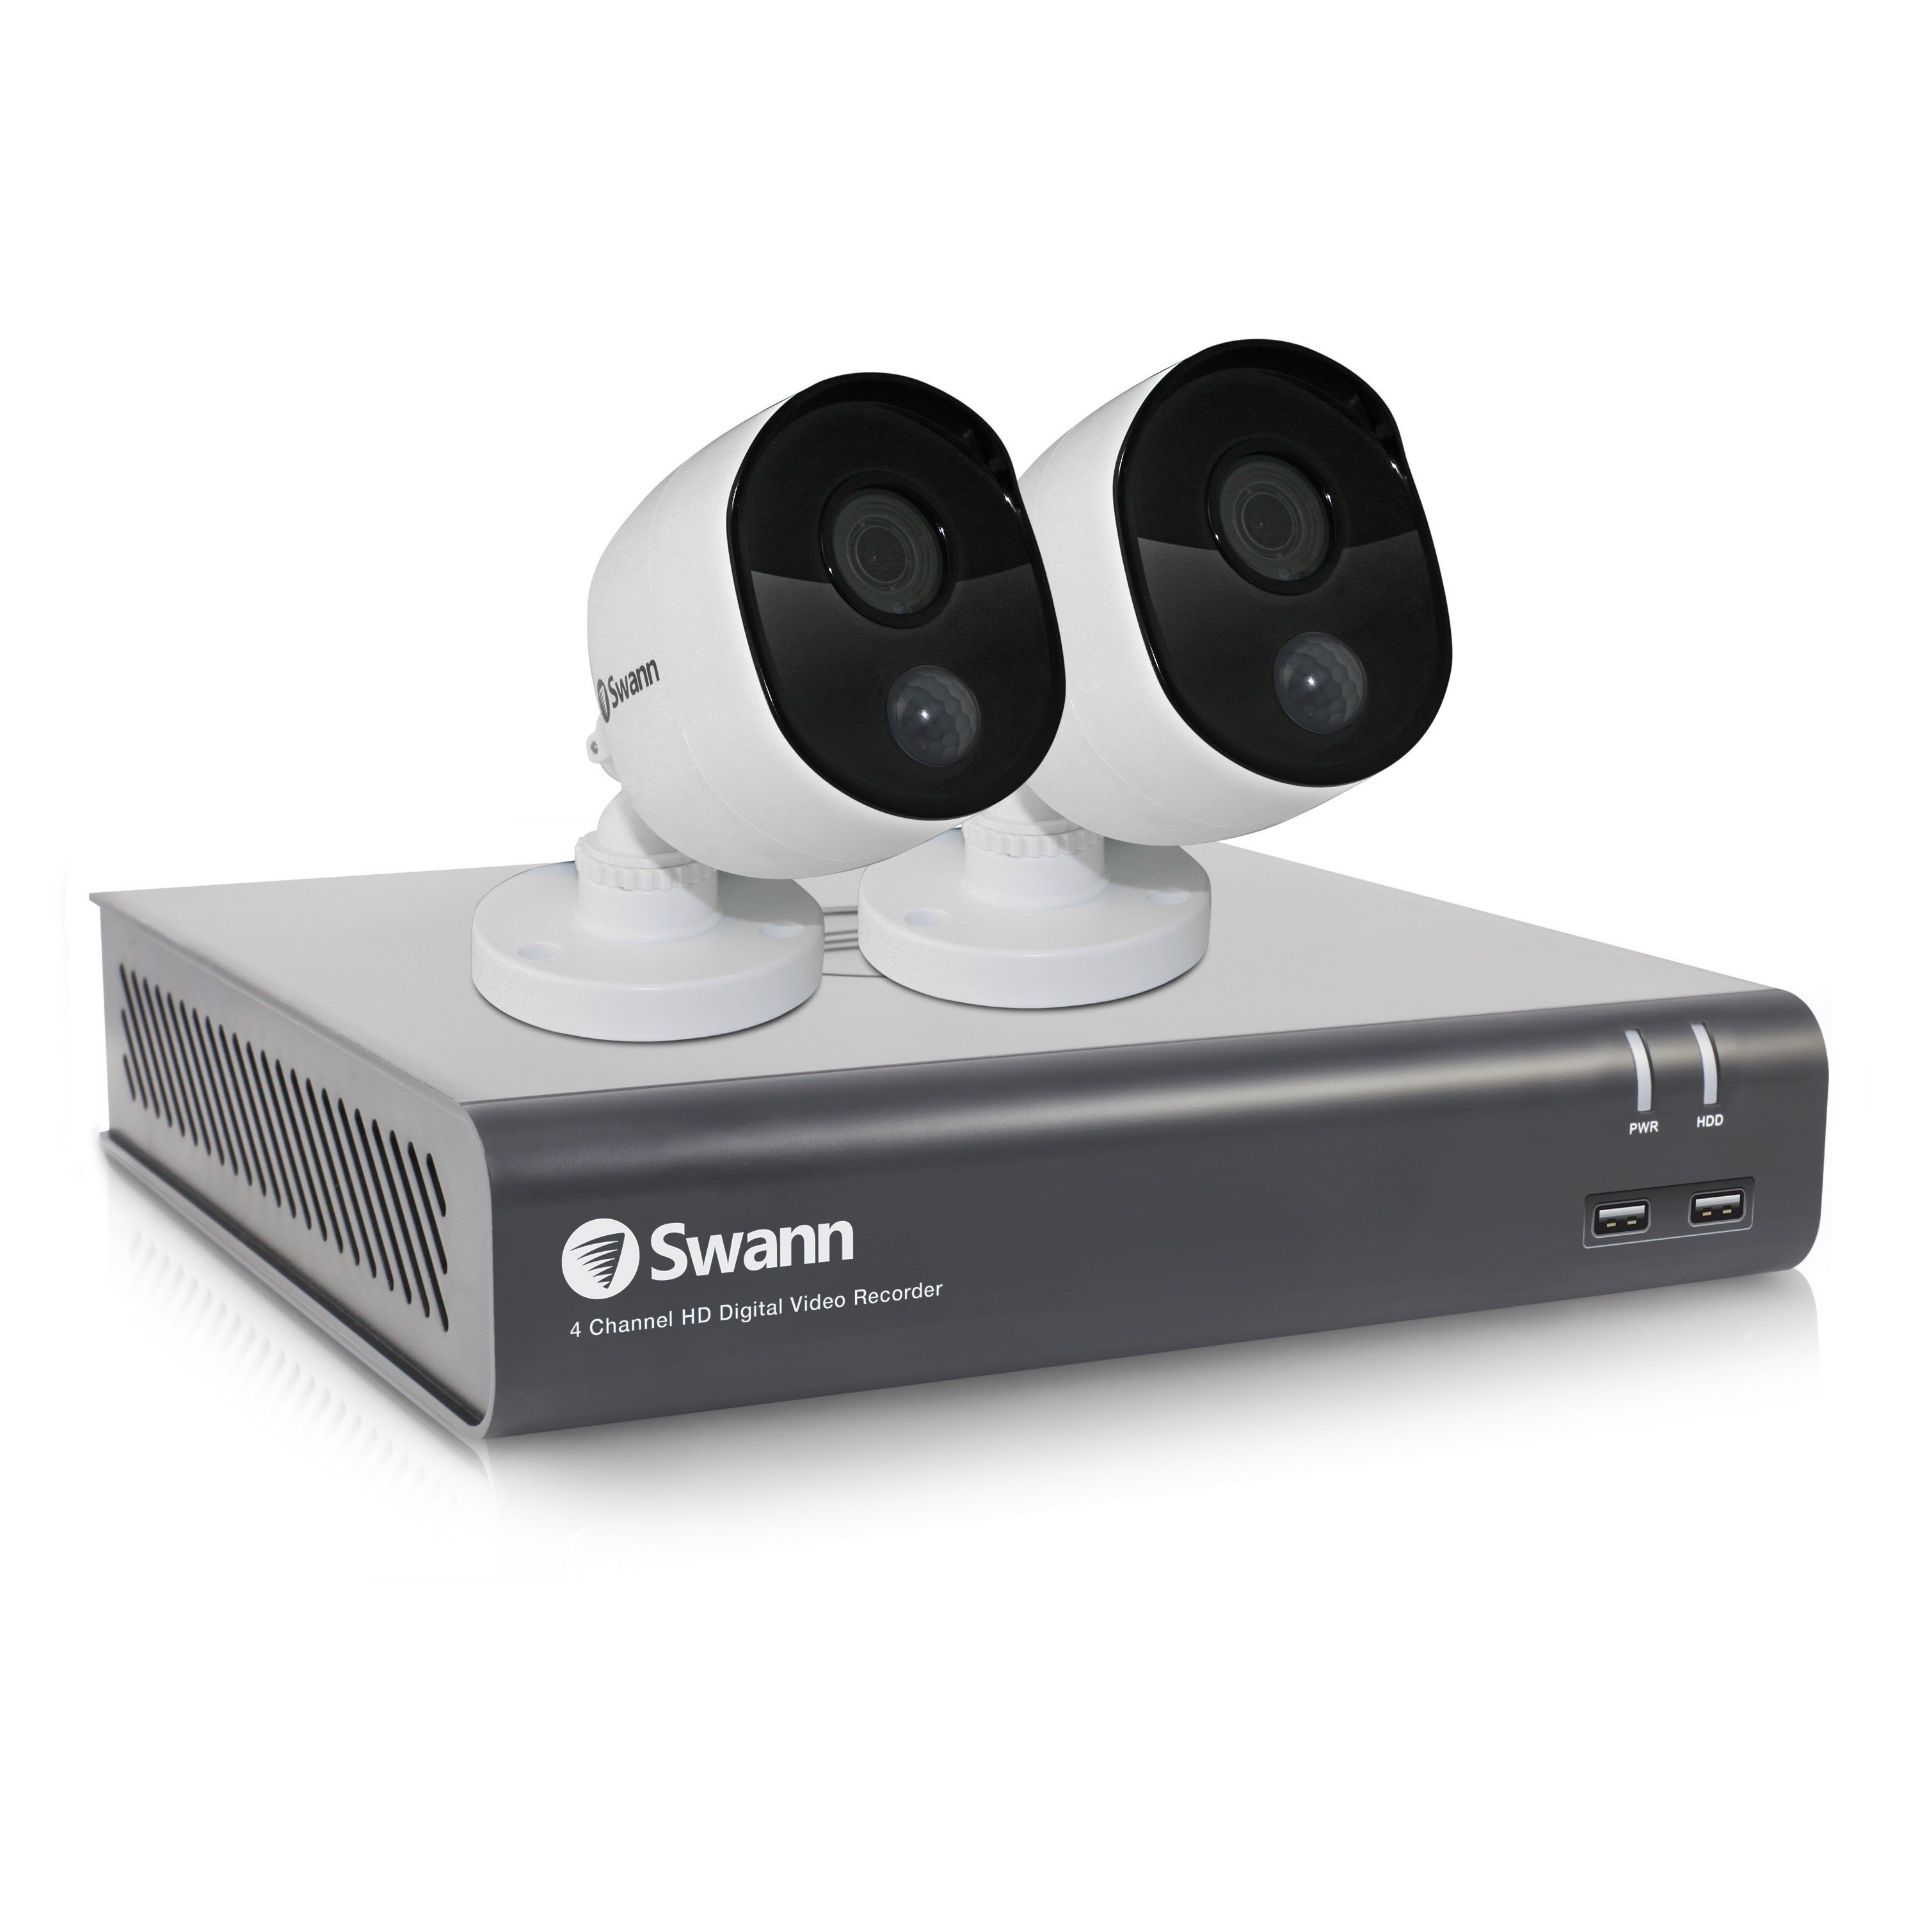 V Grade A Swann Thermal-Sensing HD Security System - 4 Channel Viewing - Motion Triggering - Day/